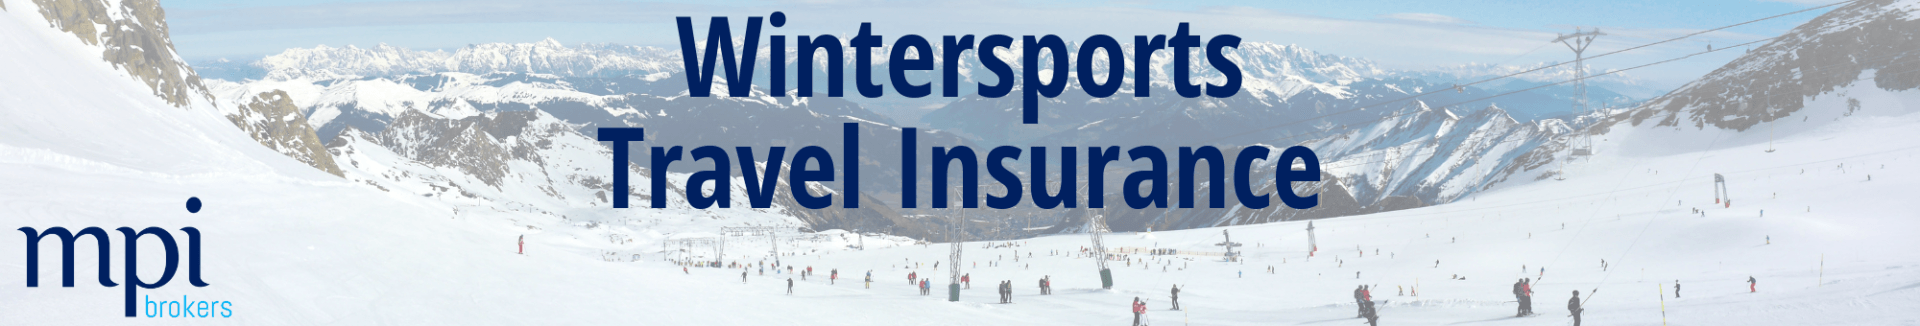 Emergency Medical Expenses if you contract coronavirus overseas, reduction for cross country skiers + race cover option